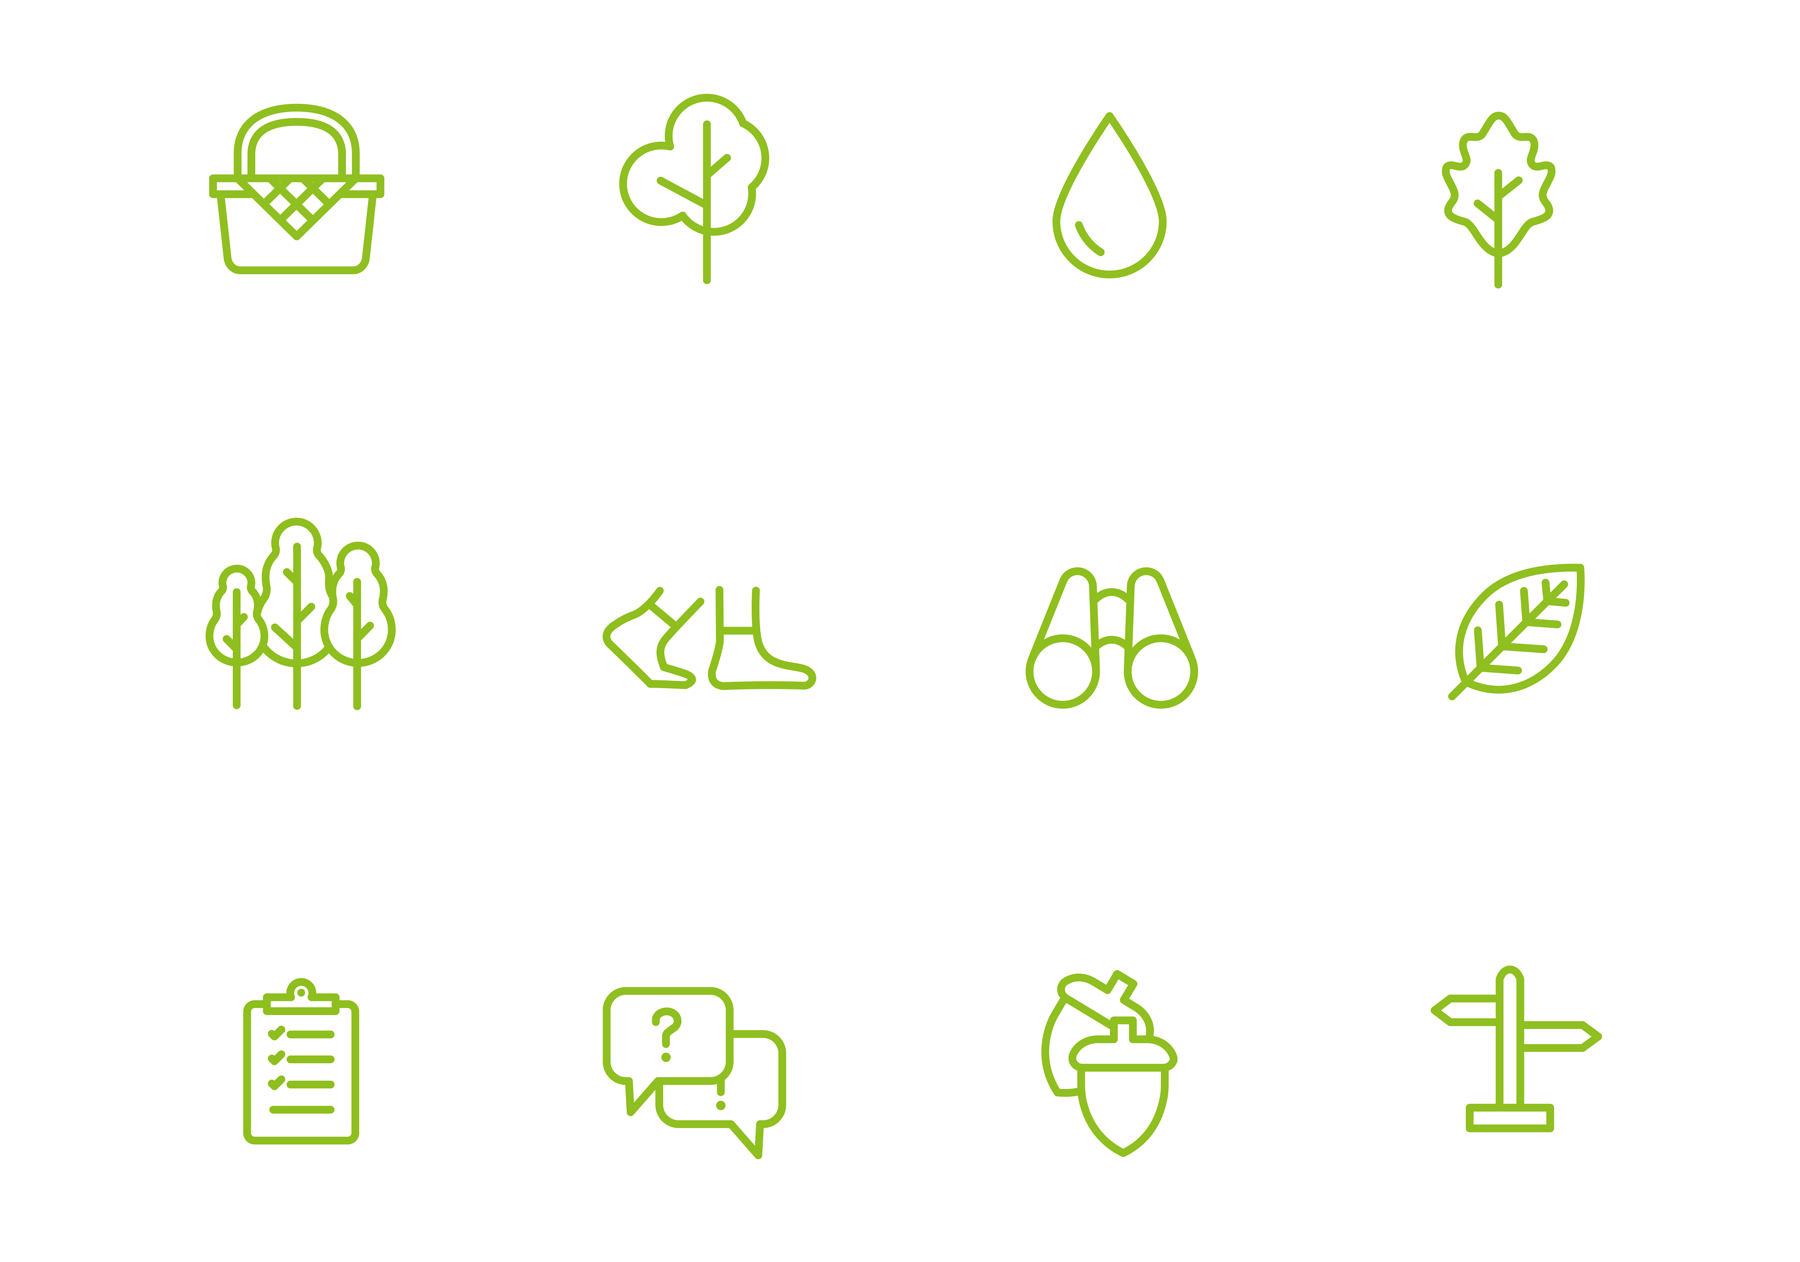 Case-Study-FriedWald-Material-Icons-Animation-cropped_smaller